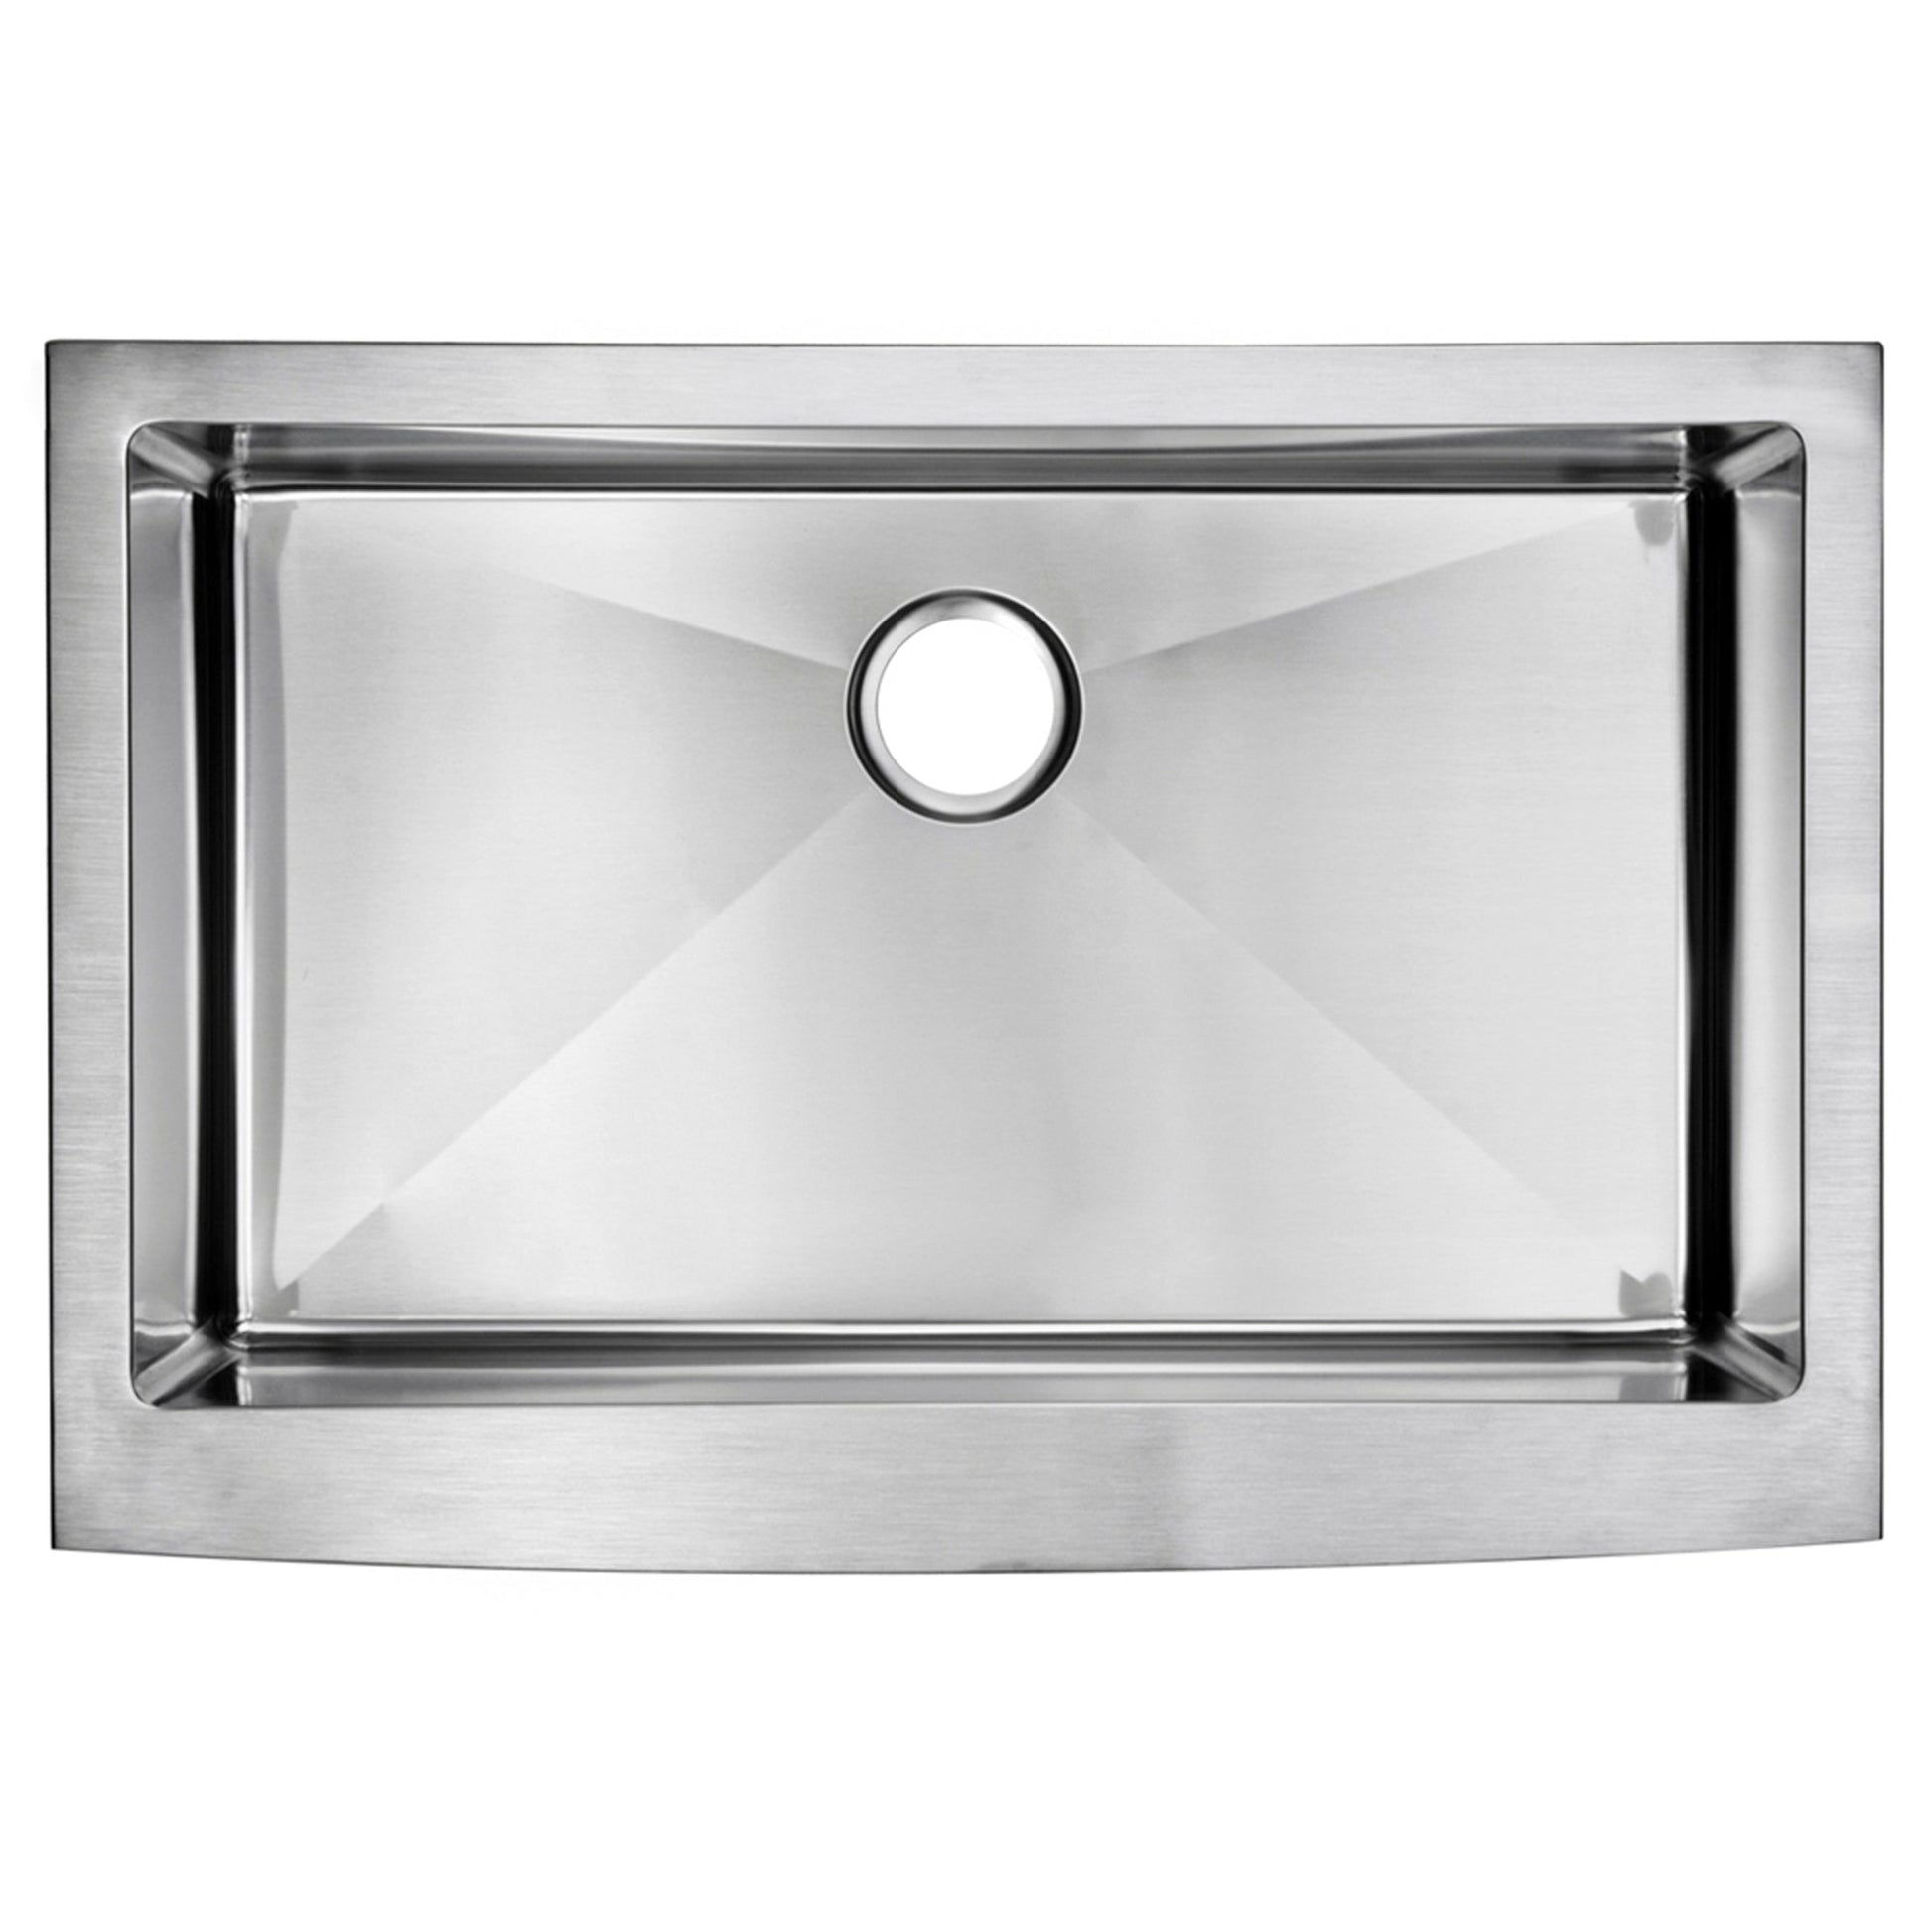 Water Creation Corner Radius Single Bowl Stainless Steel Hand Made Apron Front 33 Inch X 22 Inch Sink